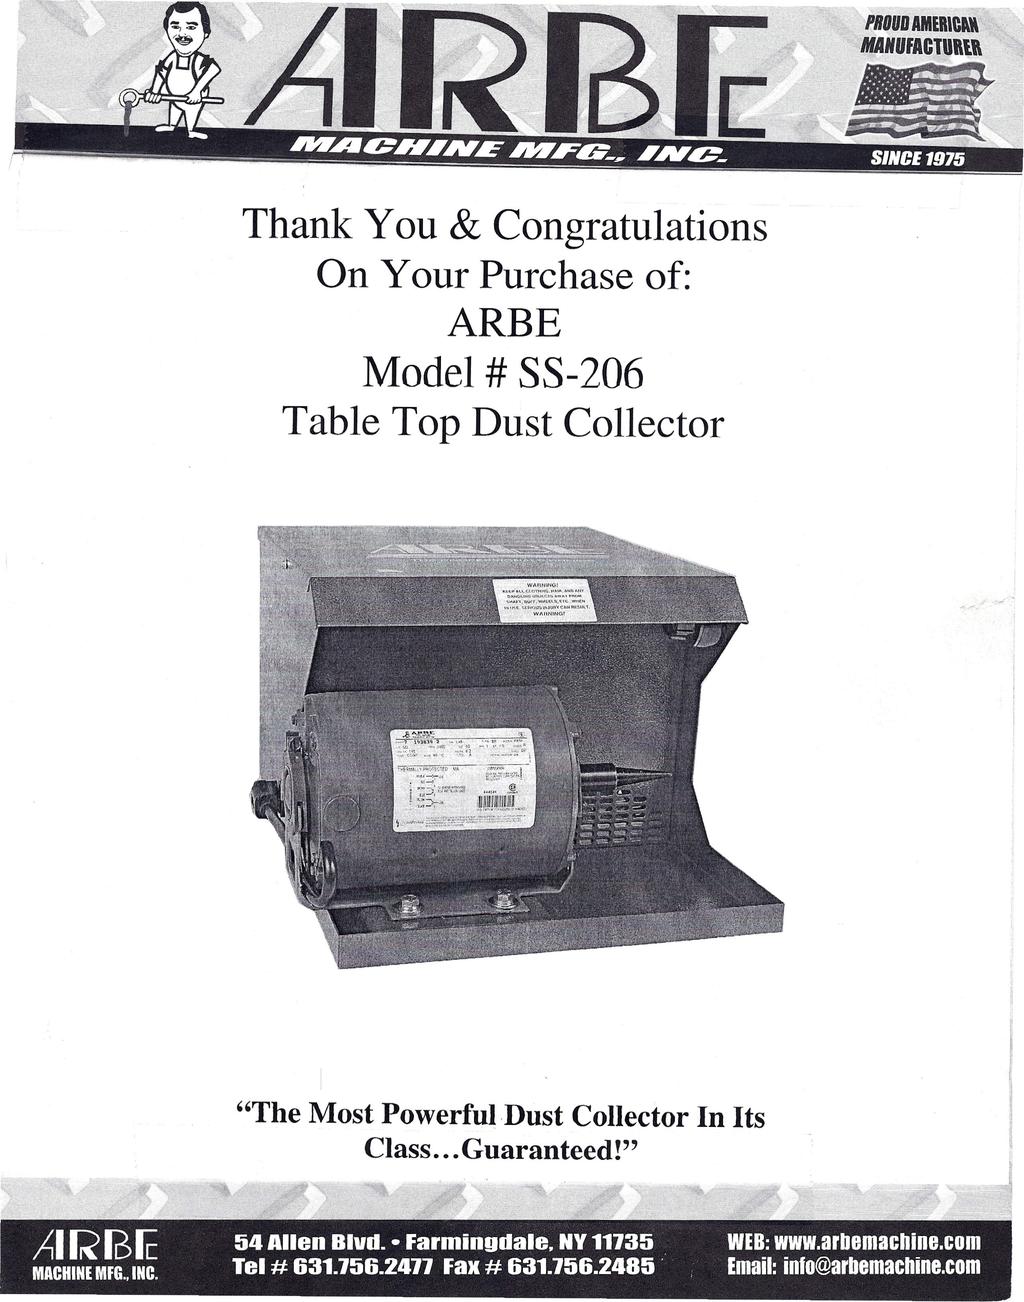 Thank You & Congratulations On Your Purchase of: ARBE Model # SS-206 Table